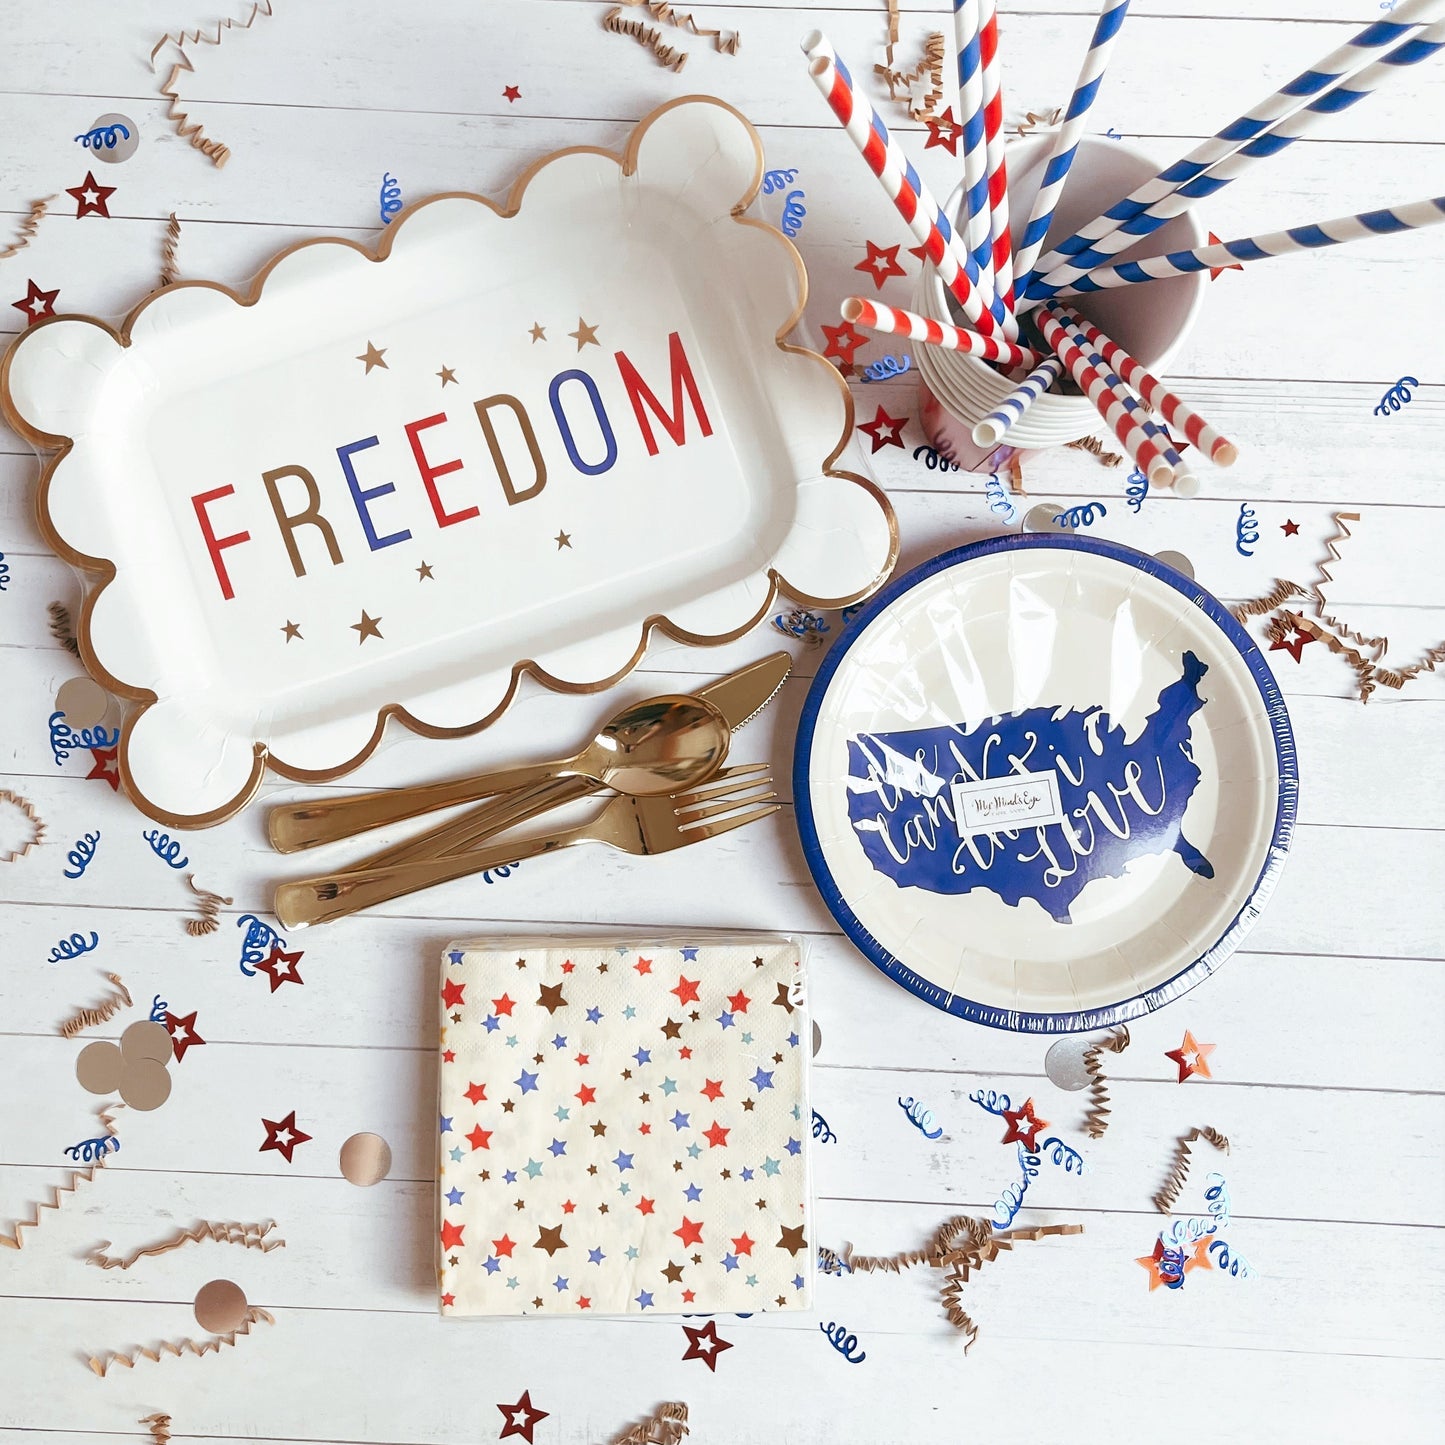 Land that I Love Freedom Party Box